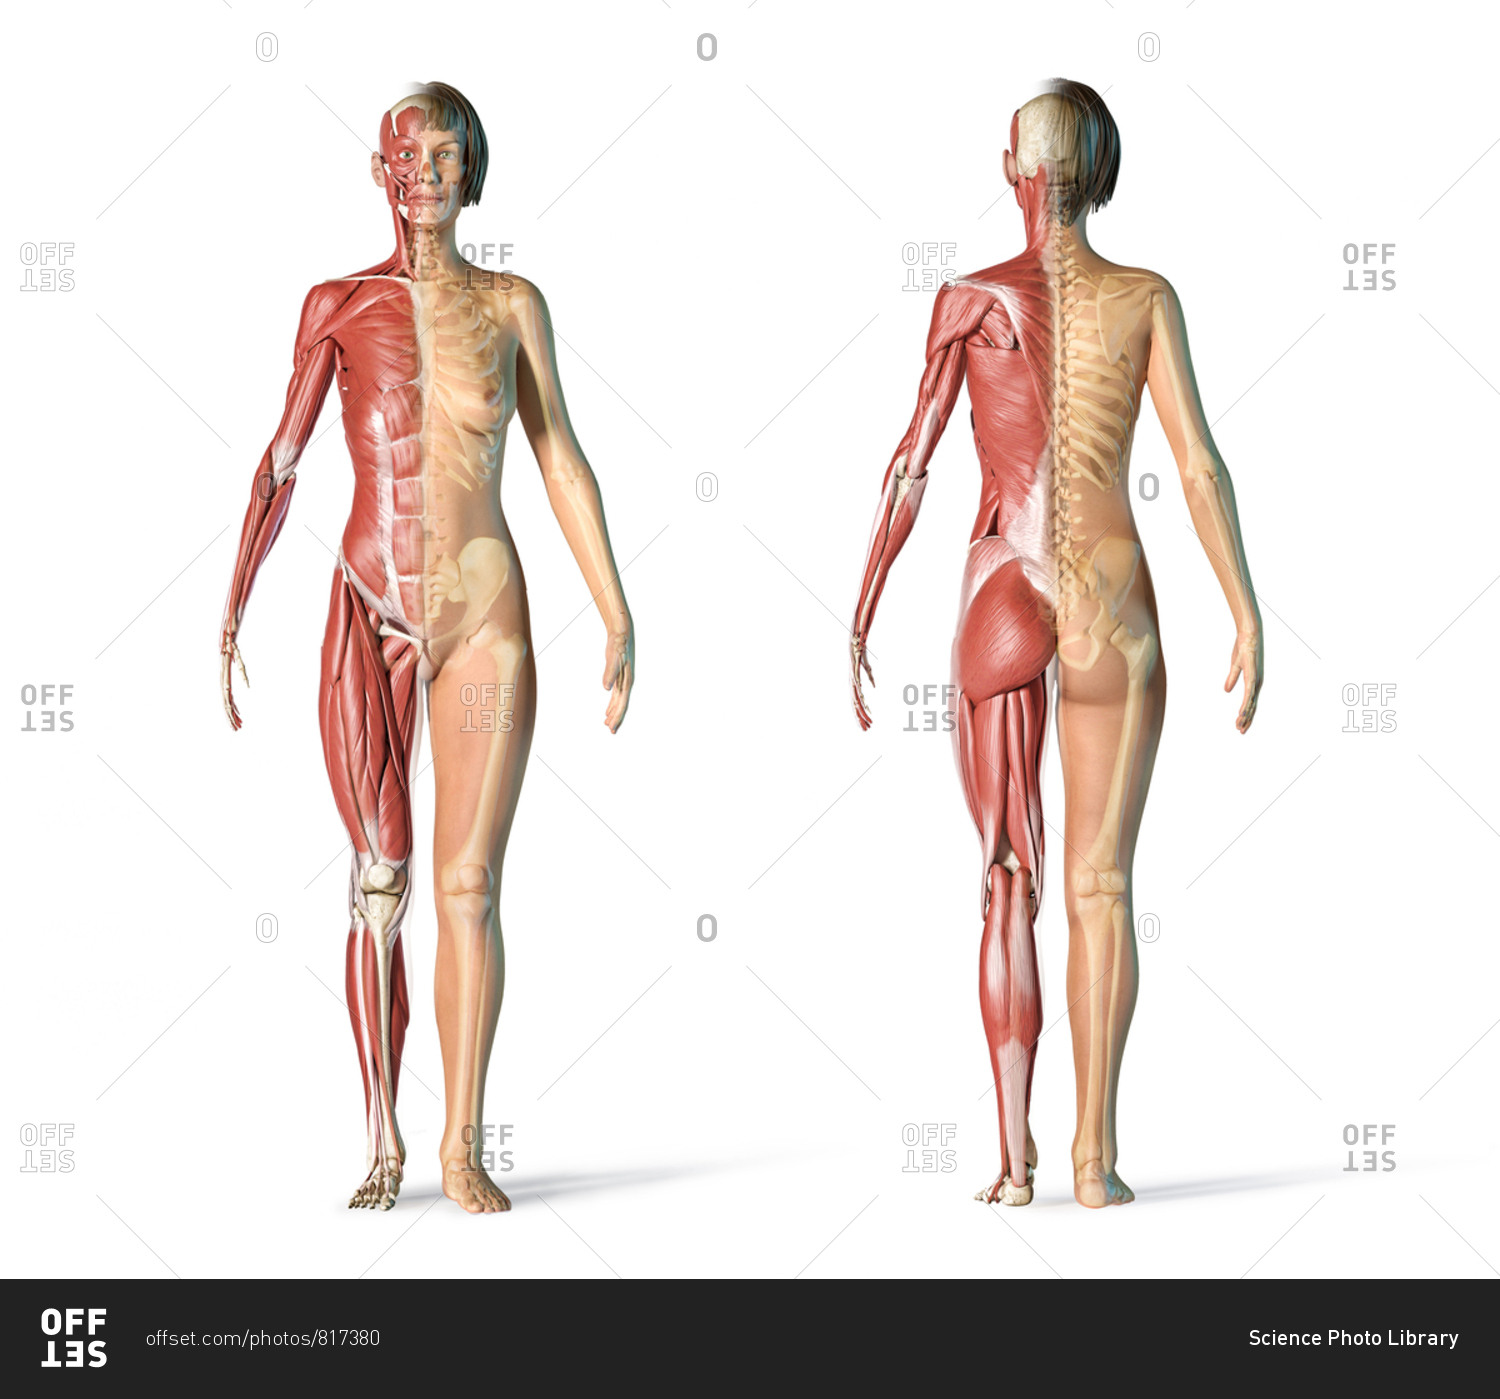 Female back muscles, illustration - Stock Image - F027/1296 - Science Photo  Library